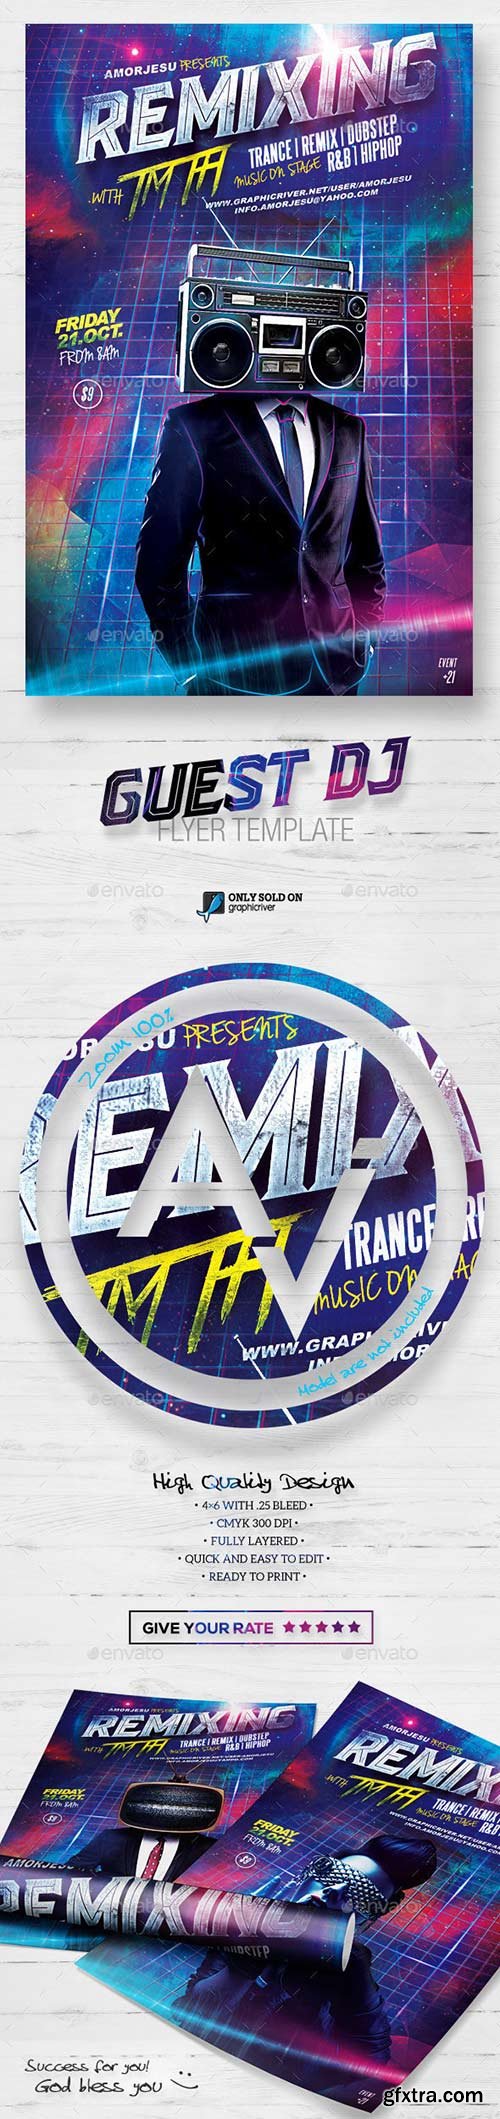 Graphicriver - Guest DJ Flyer Template 12915524